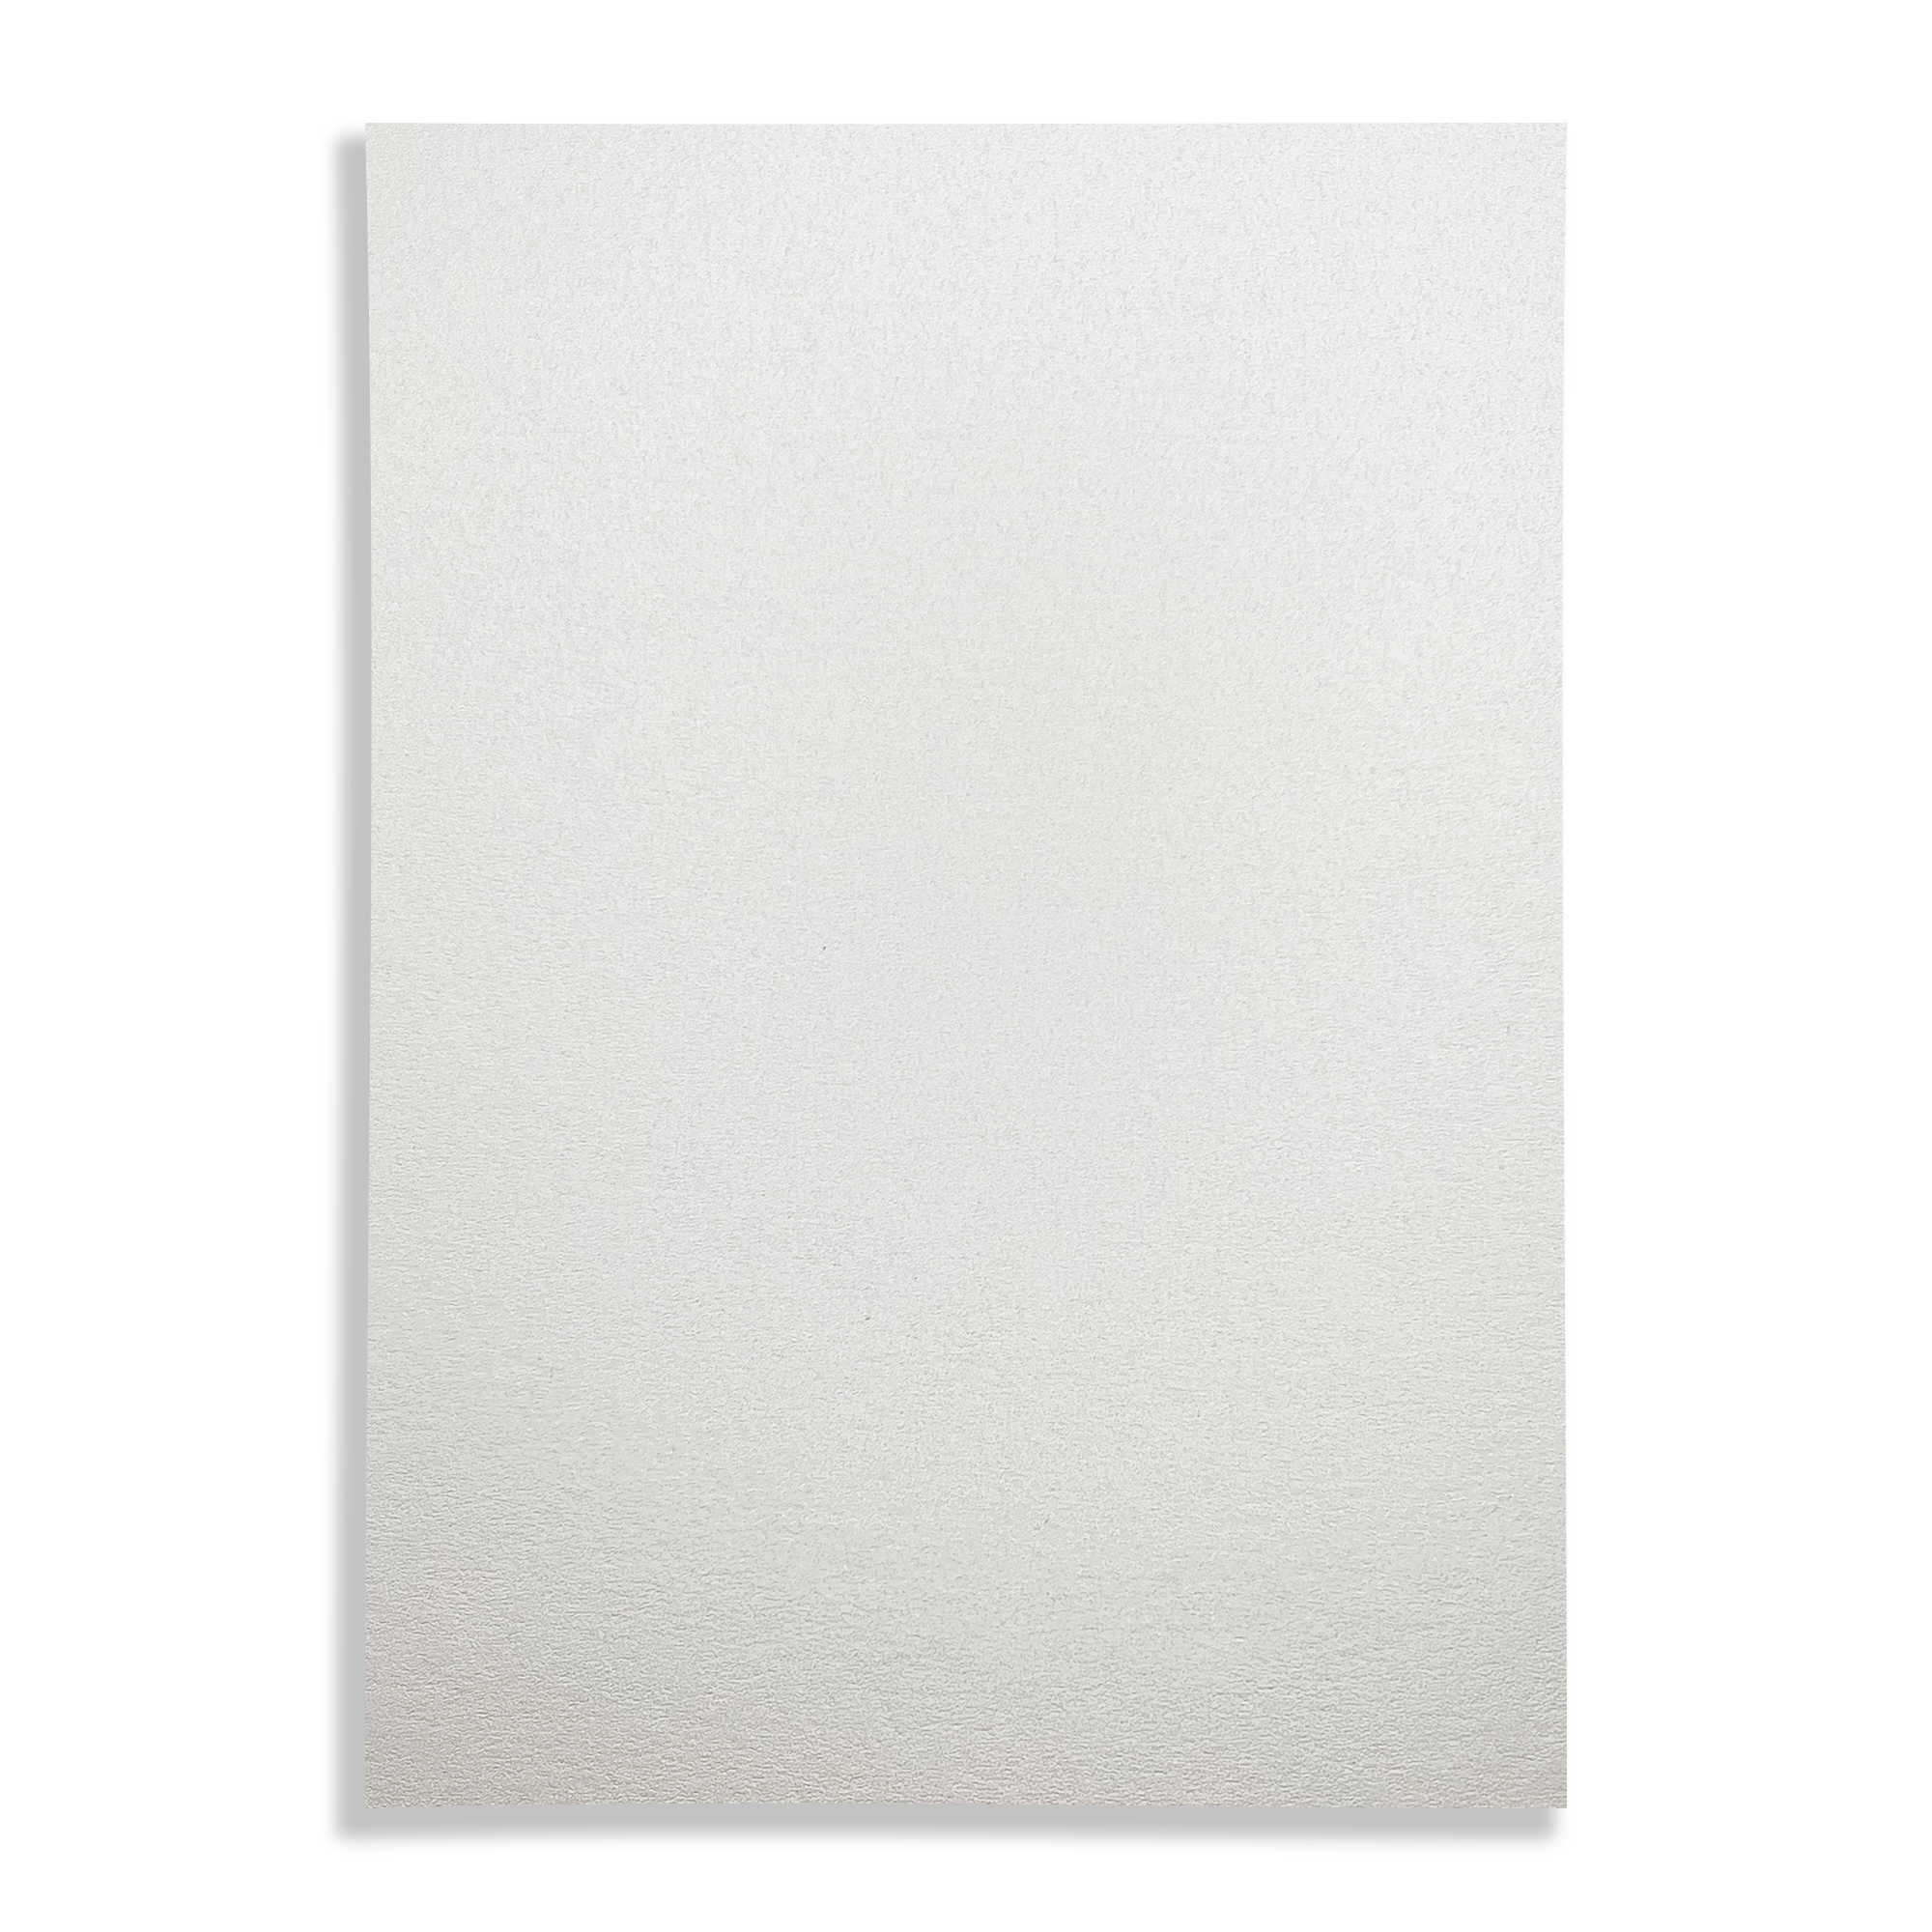 A4 COSMOS Pearl 300gsm Double-Sided Card Quartz White